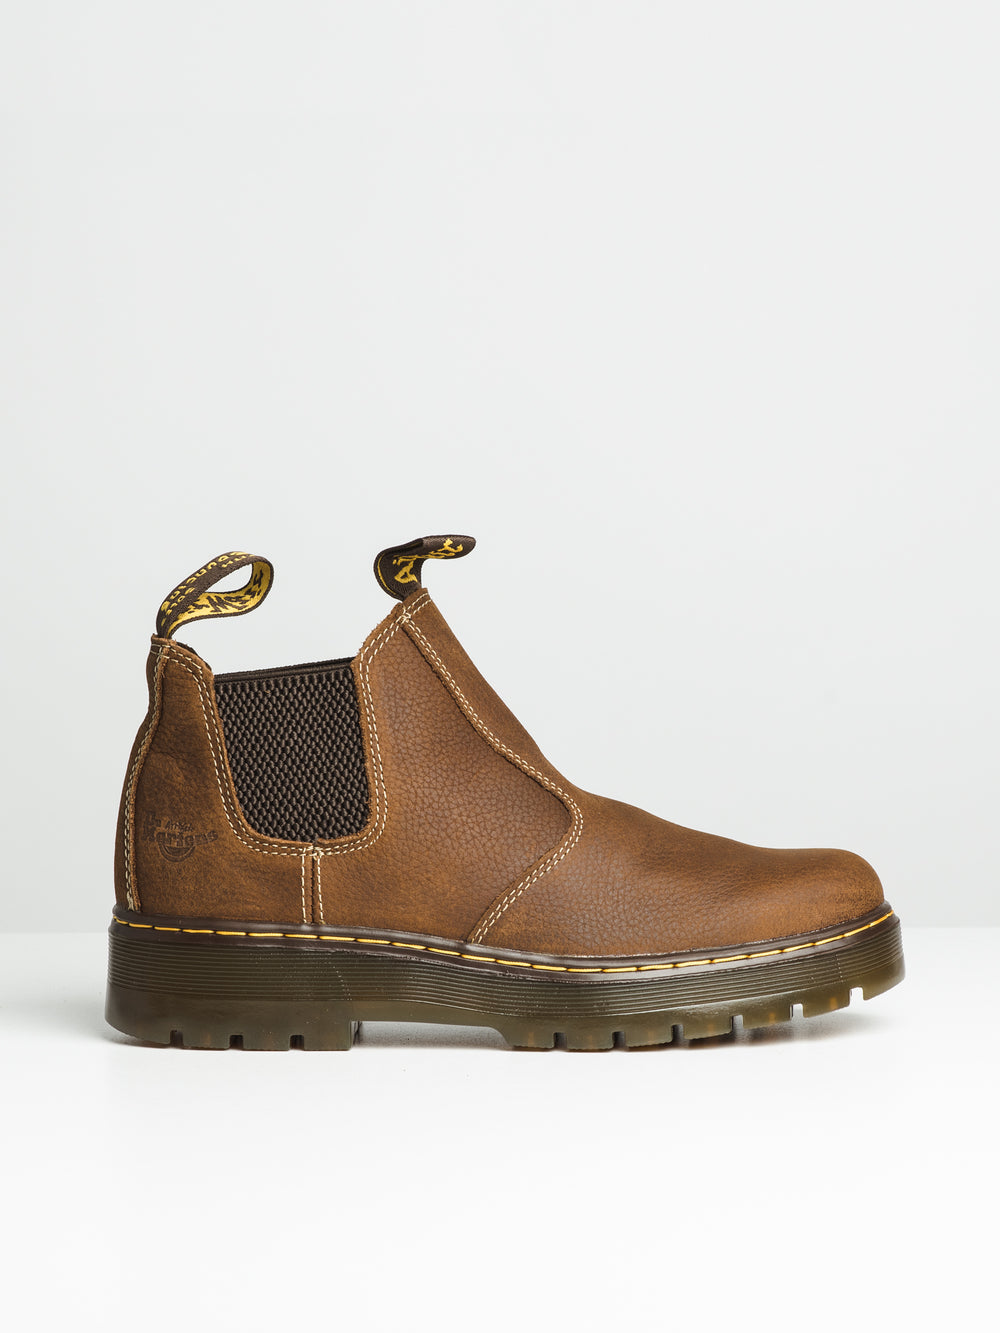 MENS DR MARTENS HARDIE BOOTS - CLEARANCE